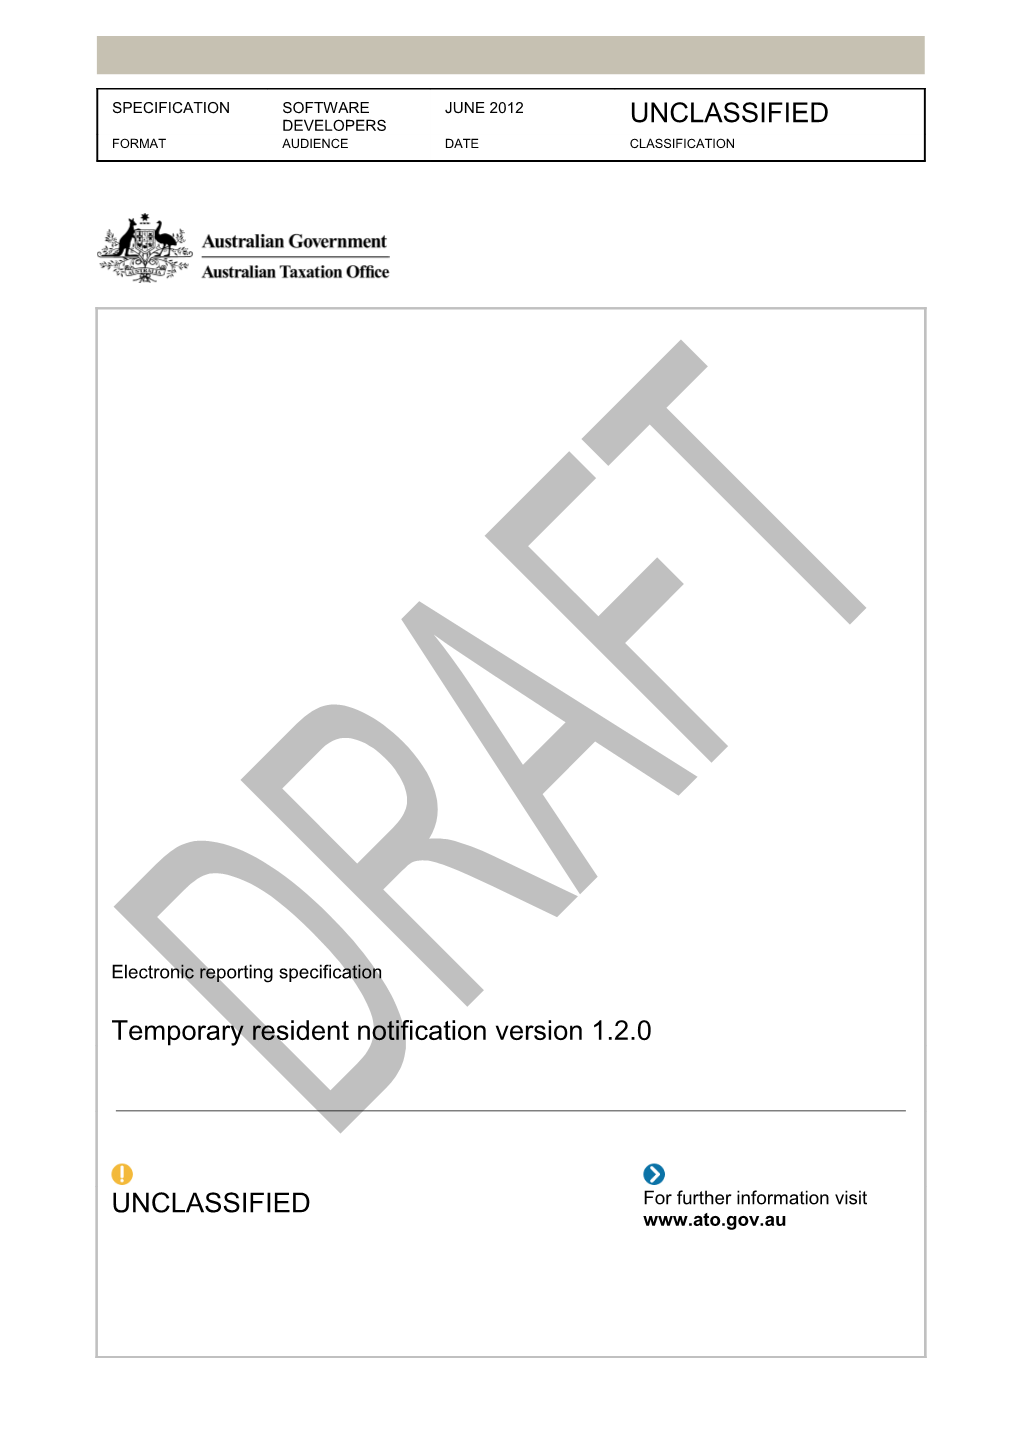 Electronic Reporting Specification - Temporary Resident Notification